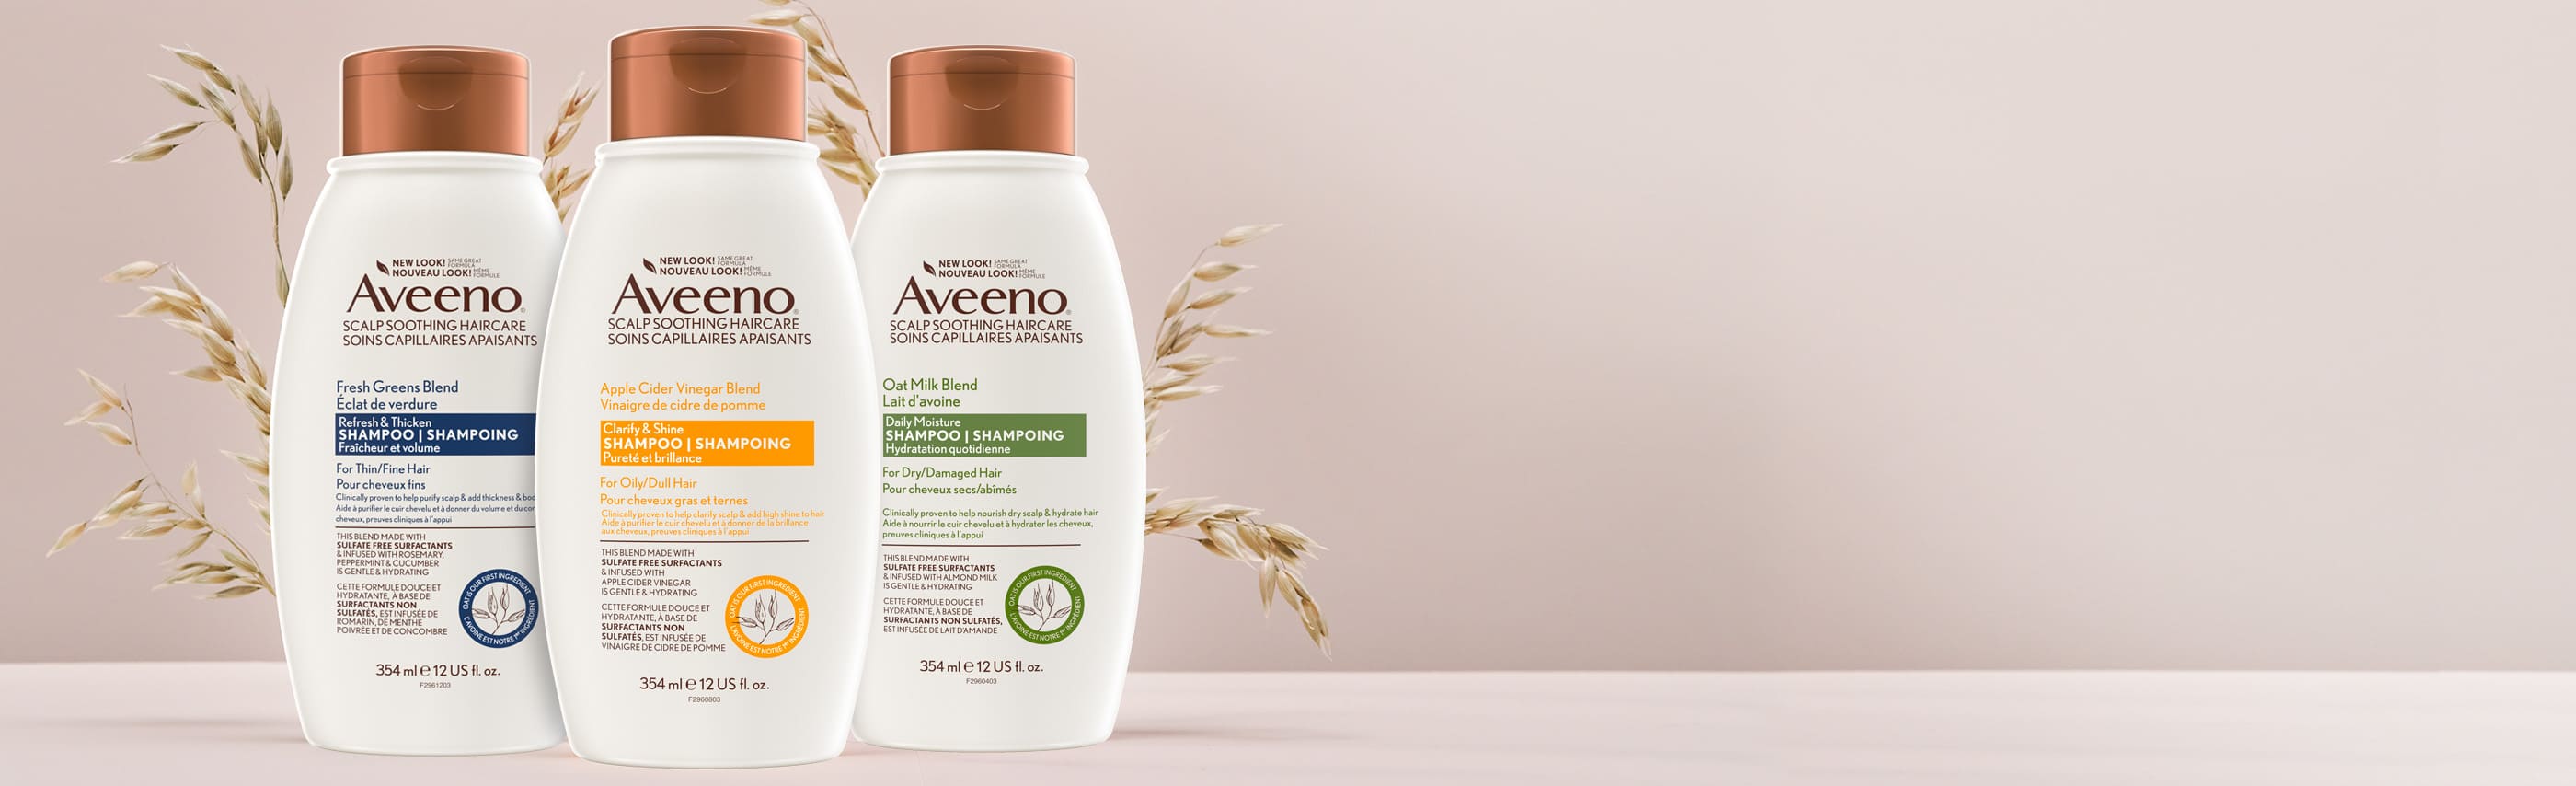 Banner including three AVEENO® Fresh Greens, Apple Cider Vinegar and Oat Milk Blends Shampoo Products, 354 mL each.